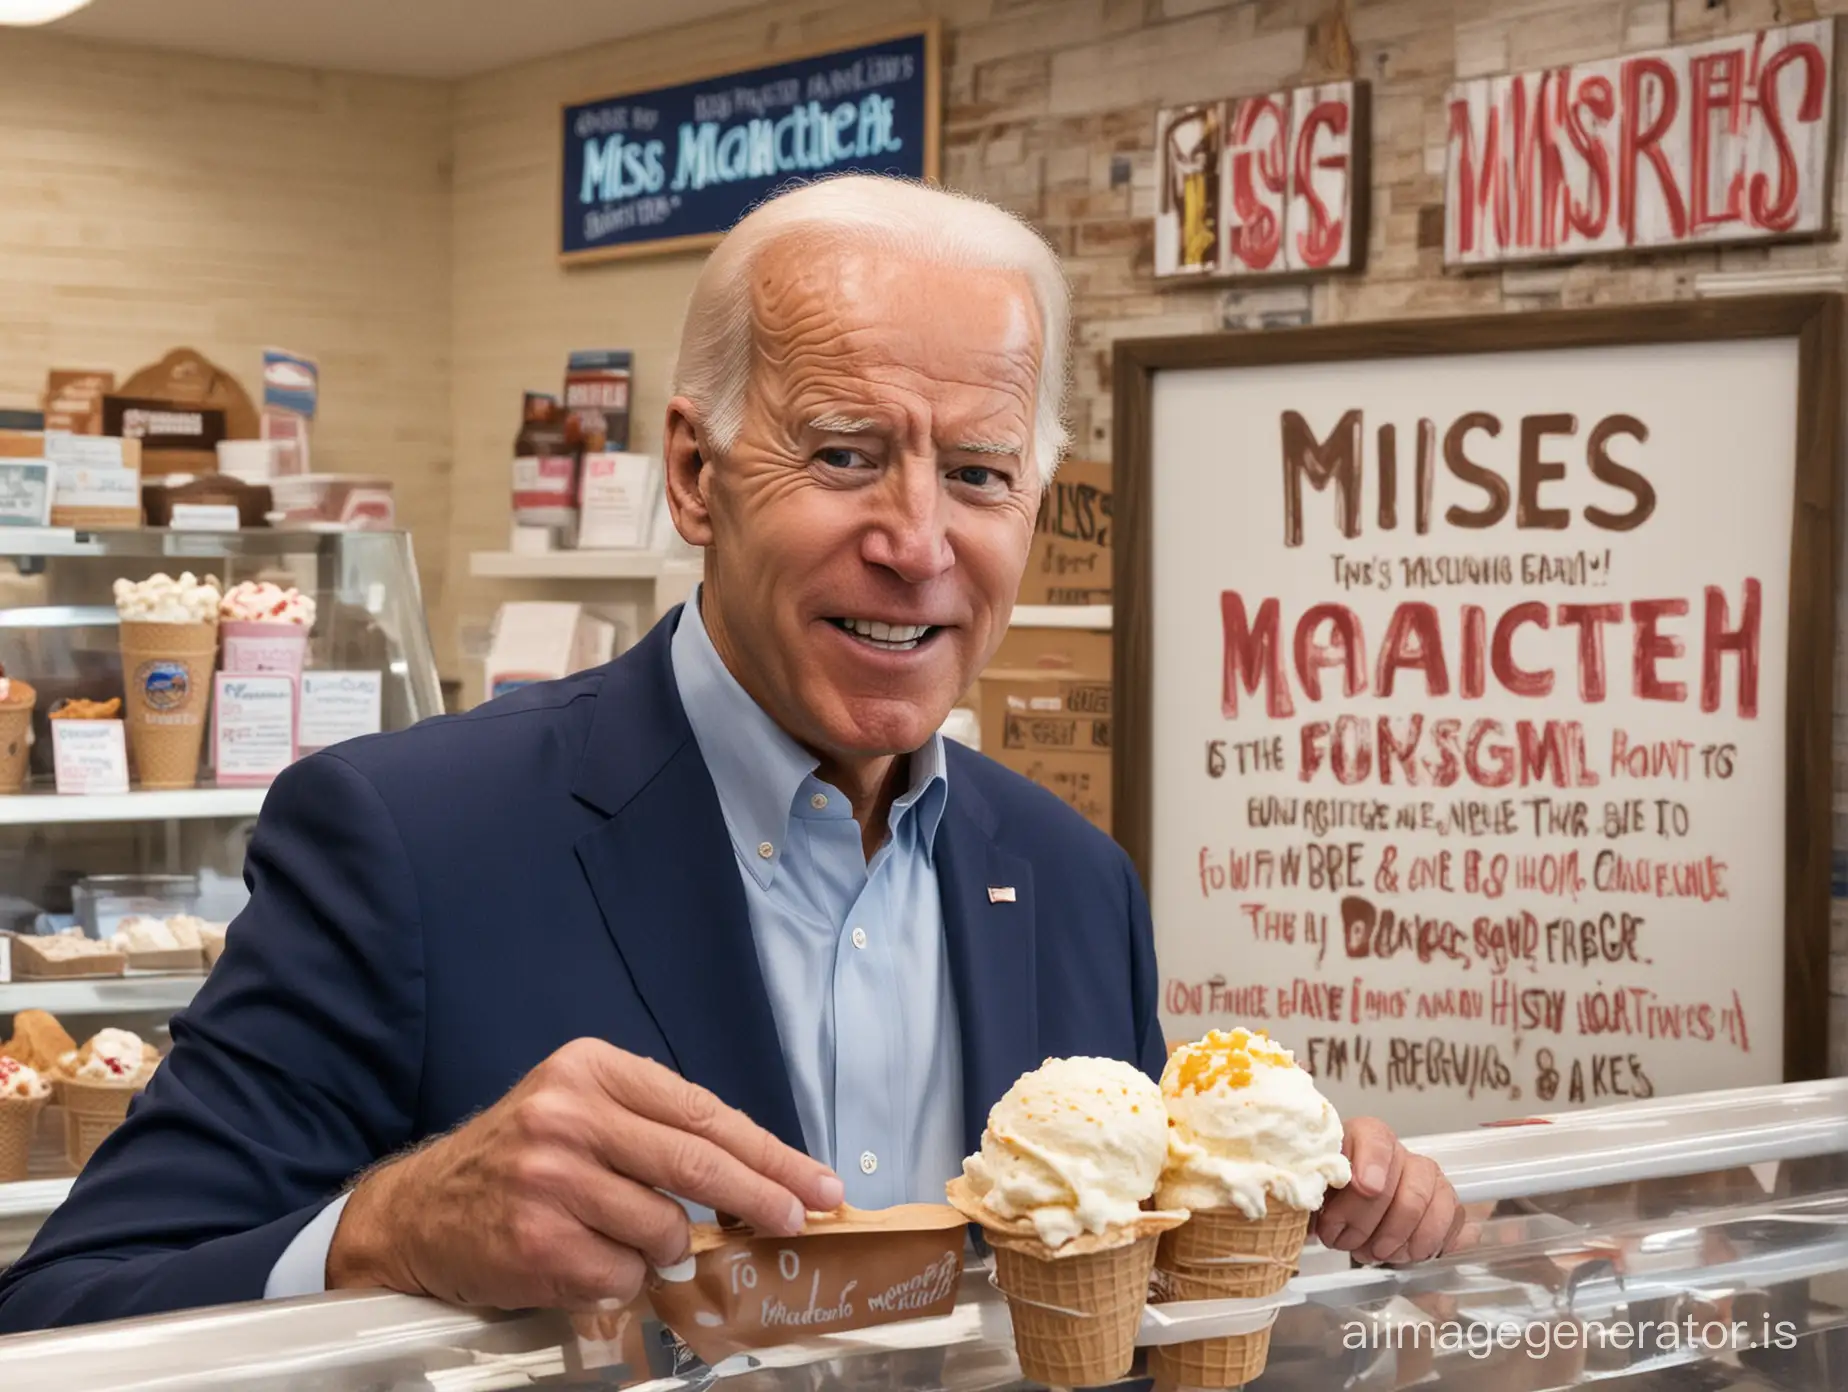 Joe-Biden-Enjoying-Ice-Cream-in-a-Colorful-Store-with-Mismatched-Realities-Sign